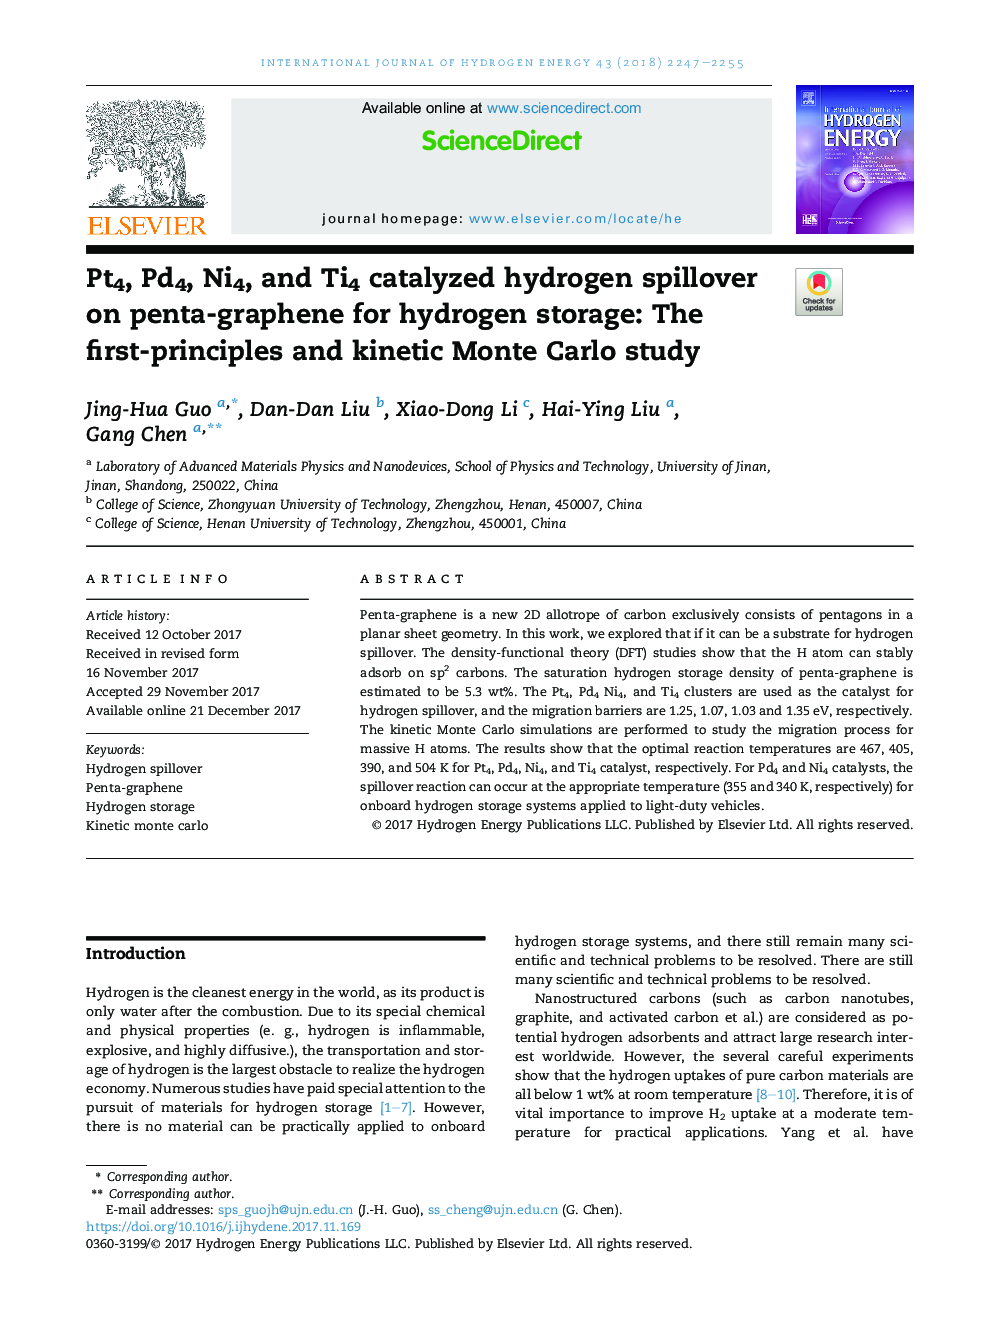 Pt4, Pd4, Ni4, and Ti4 catalyzed hydrogen spillover on penta-graphene for hydrogen storage: The first-principles and kinetic Monte Carlo study